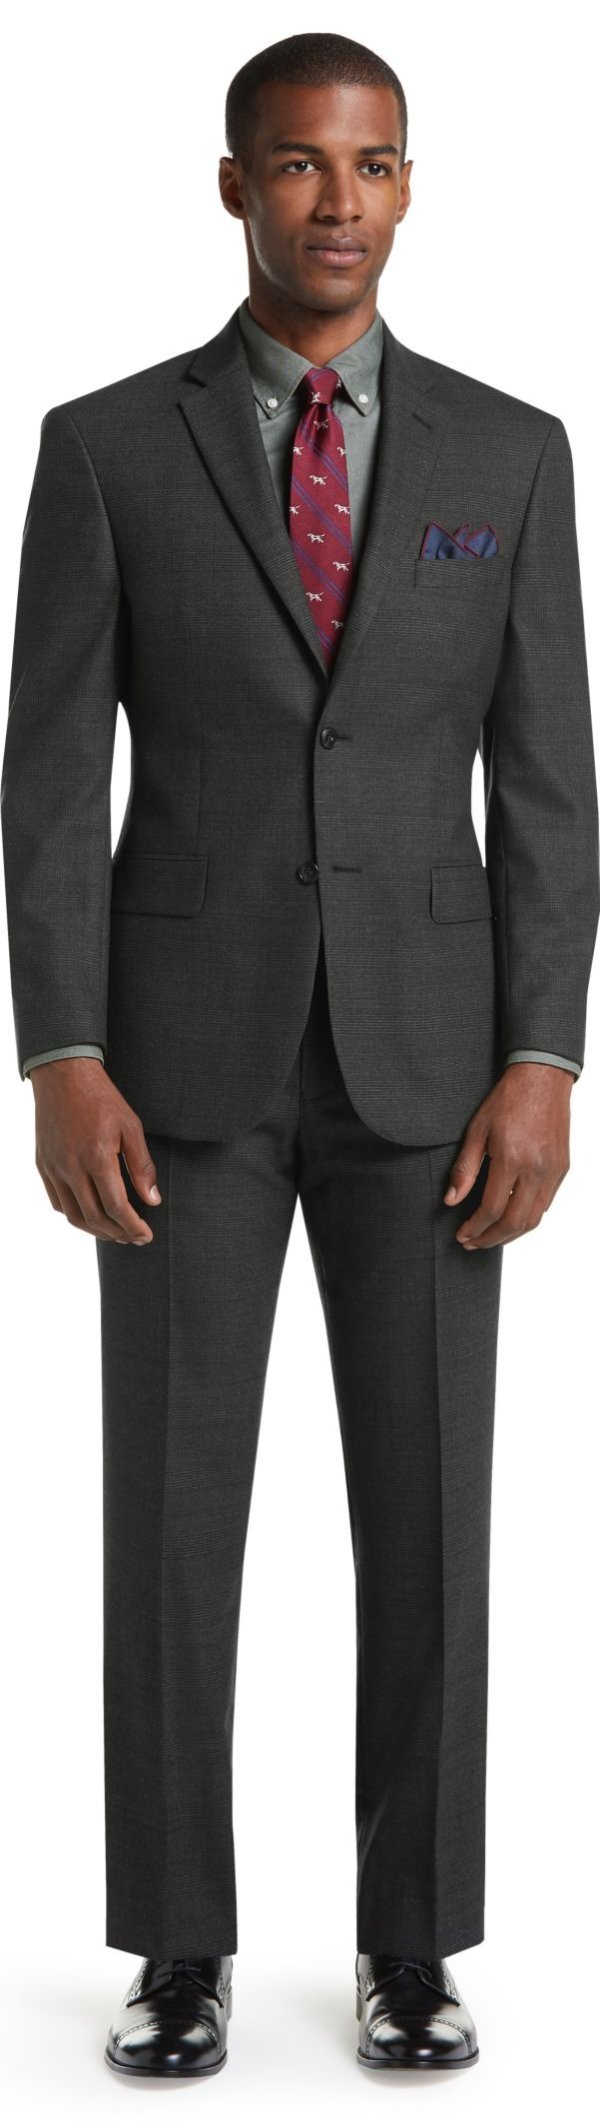 1905 Collection Tailored Fit Plaid Suit with brrr°® comfort CLEARANCE - All Clearance | Jos A Bank